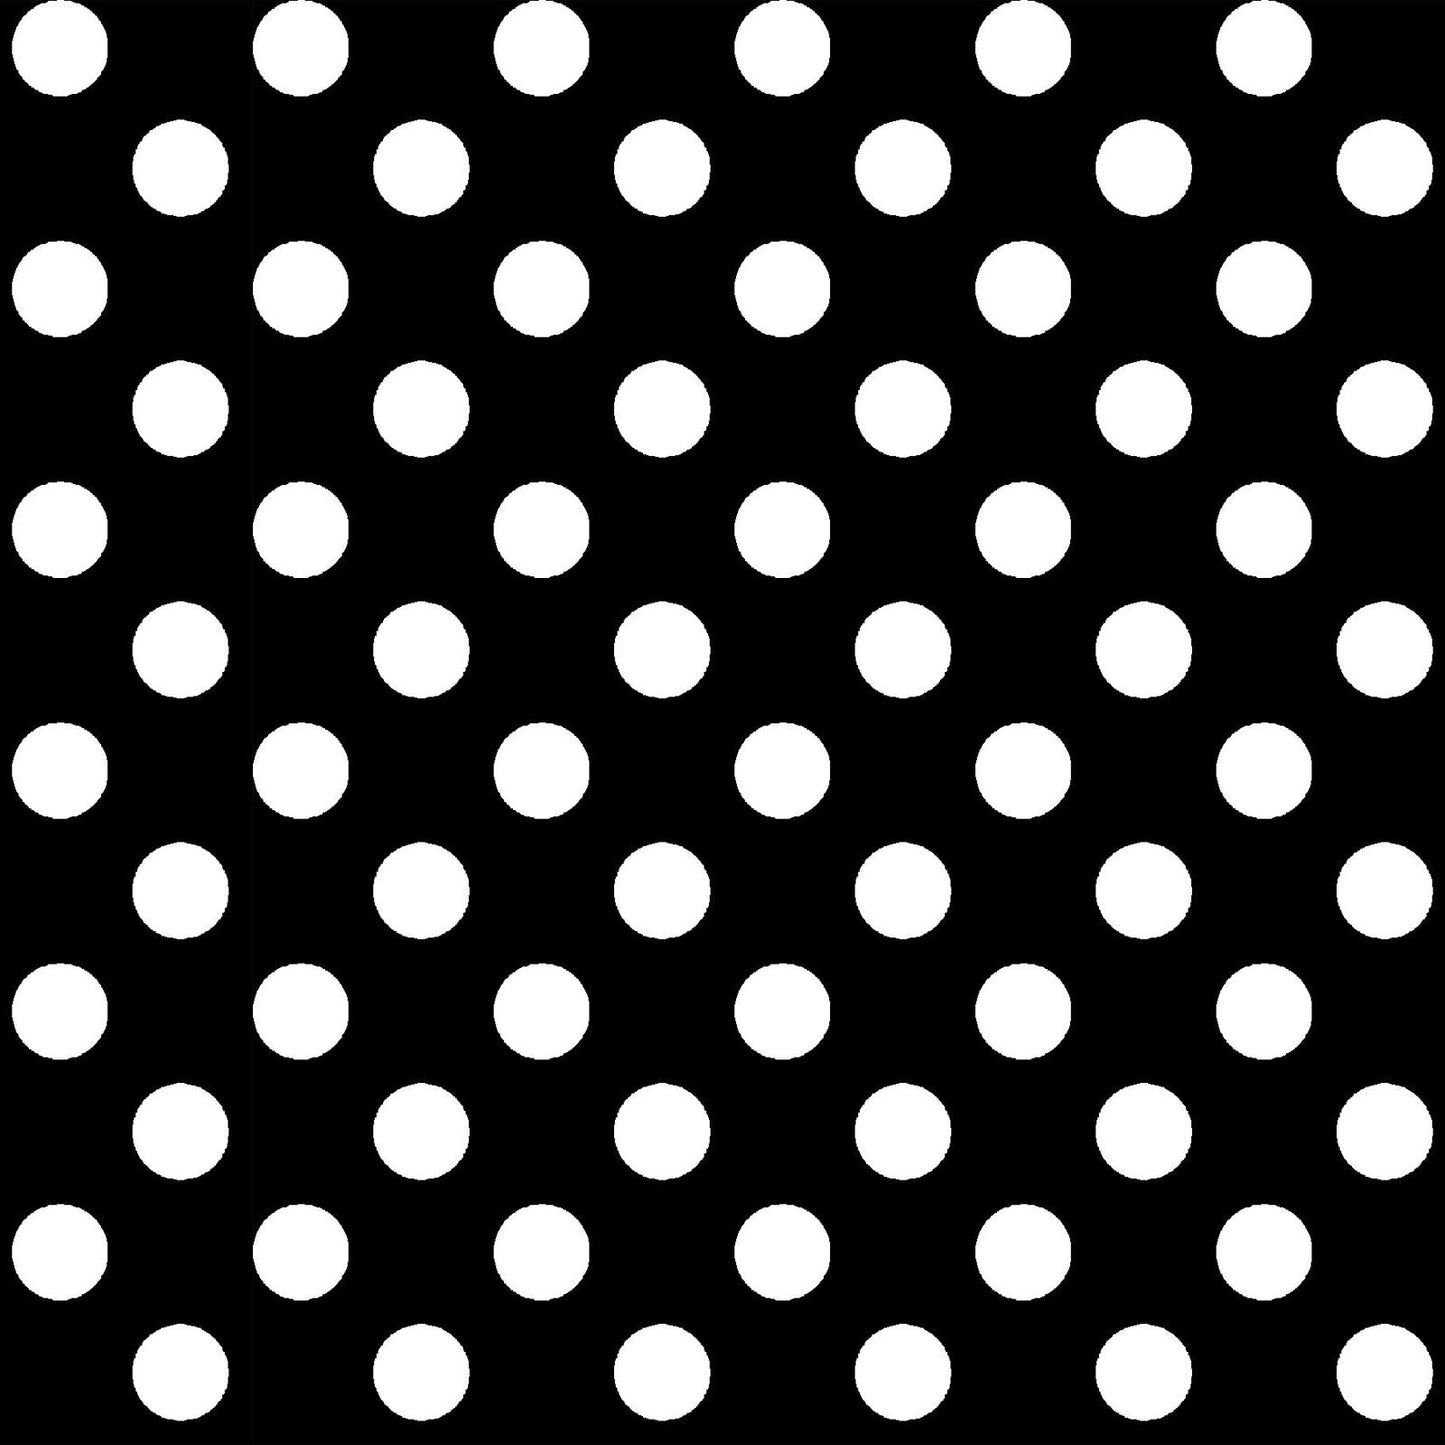 White on Black Dots is part of the Kimberbell Basics line designed by Kim Christopherson for Maywood Studio. This fabric features large white dots in a symmetrical pattern on a black background. It is perfect for adding variety to any project and the pattern and color blend seamlessly with other Kimberbell Basic fabrics.